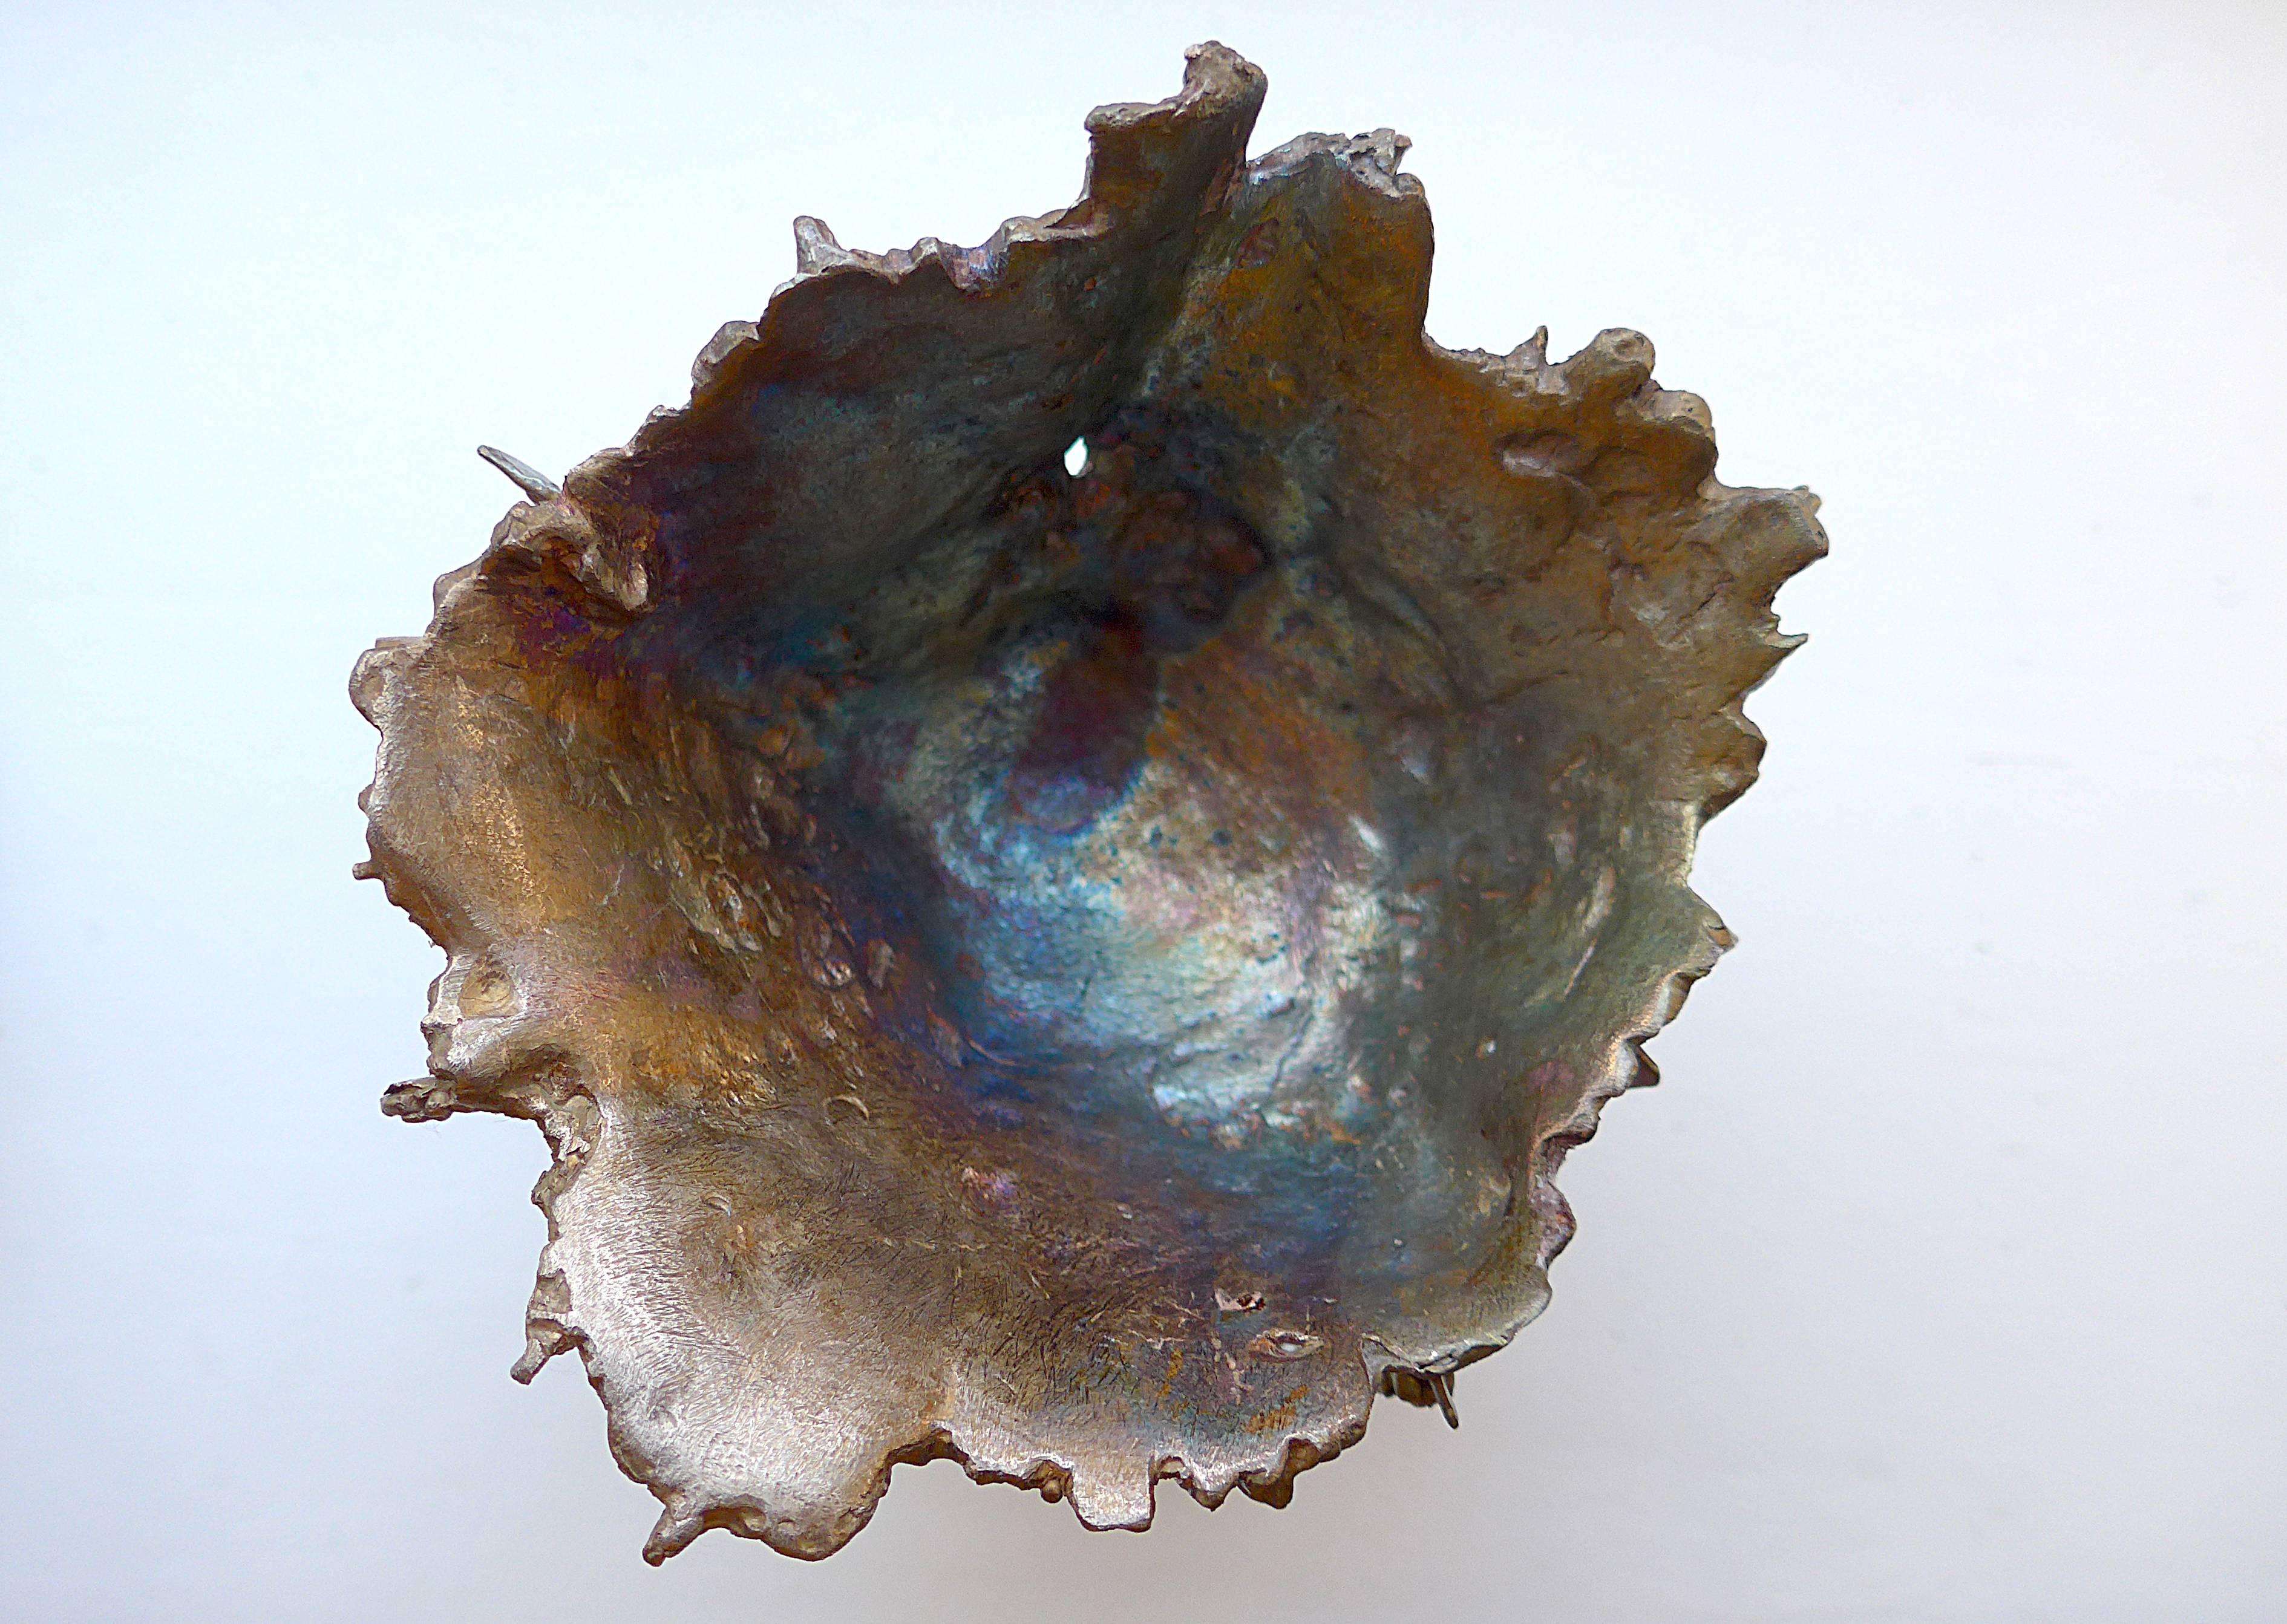 This bronze vessel was created in 2014 by Tabor and Villalobos. Graham Tabor and Miguel Villalobos create unique and limited edition jewelry and objects. 

Graham Tabor worked extensively as a designer in the fashion industry before founding his